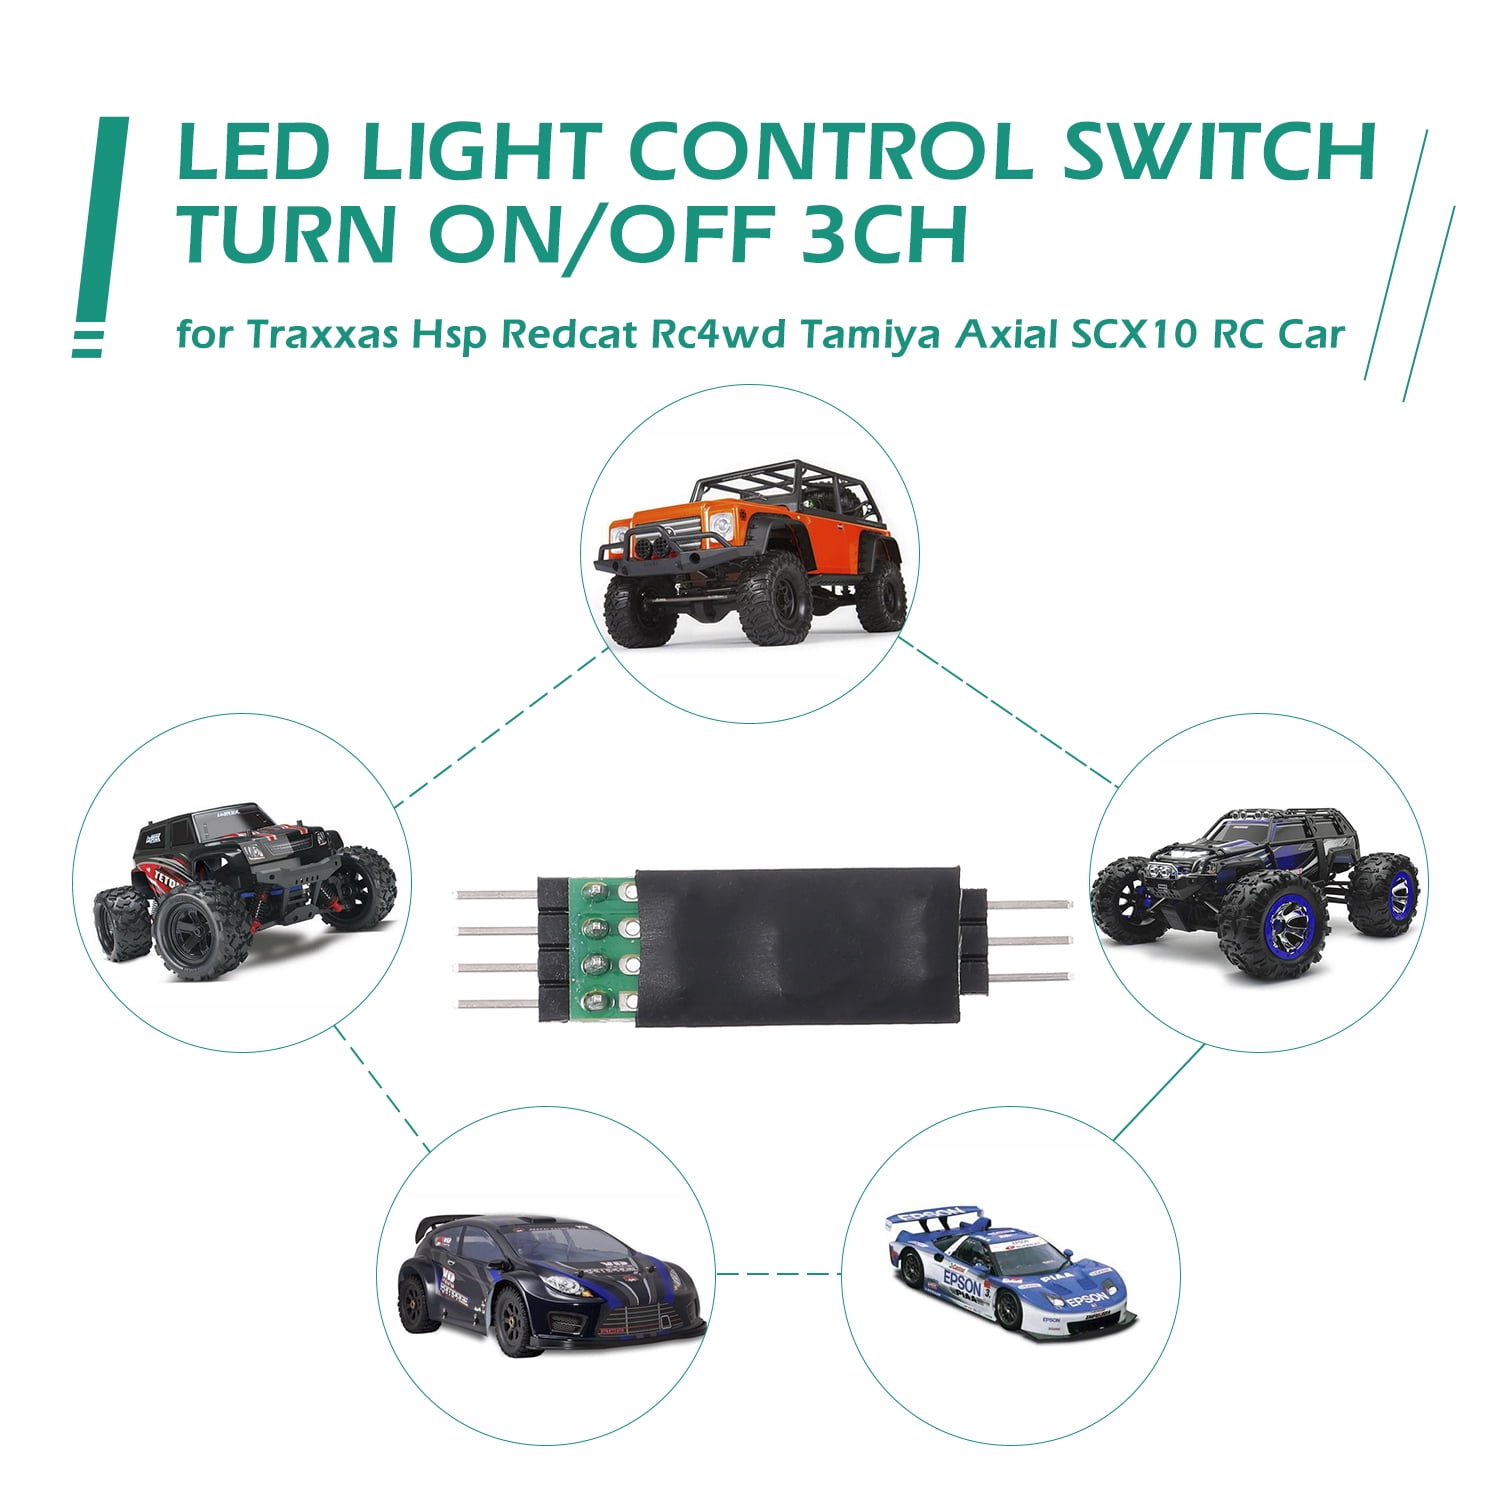 LED Lamp Light Control Switch Panel System Turn on/Off 3CH for RC Car Vehi iire